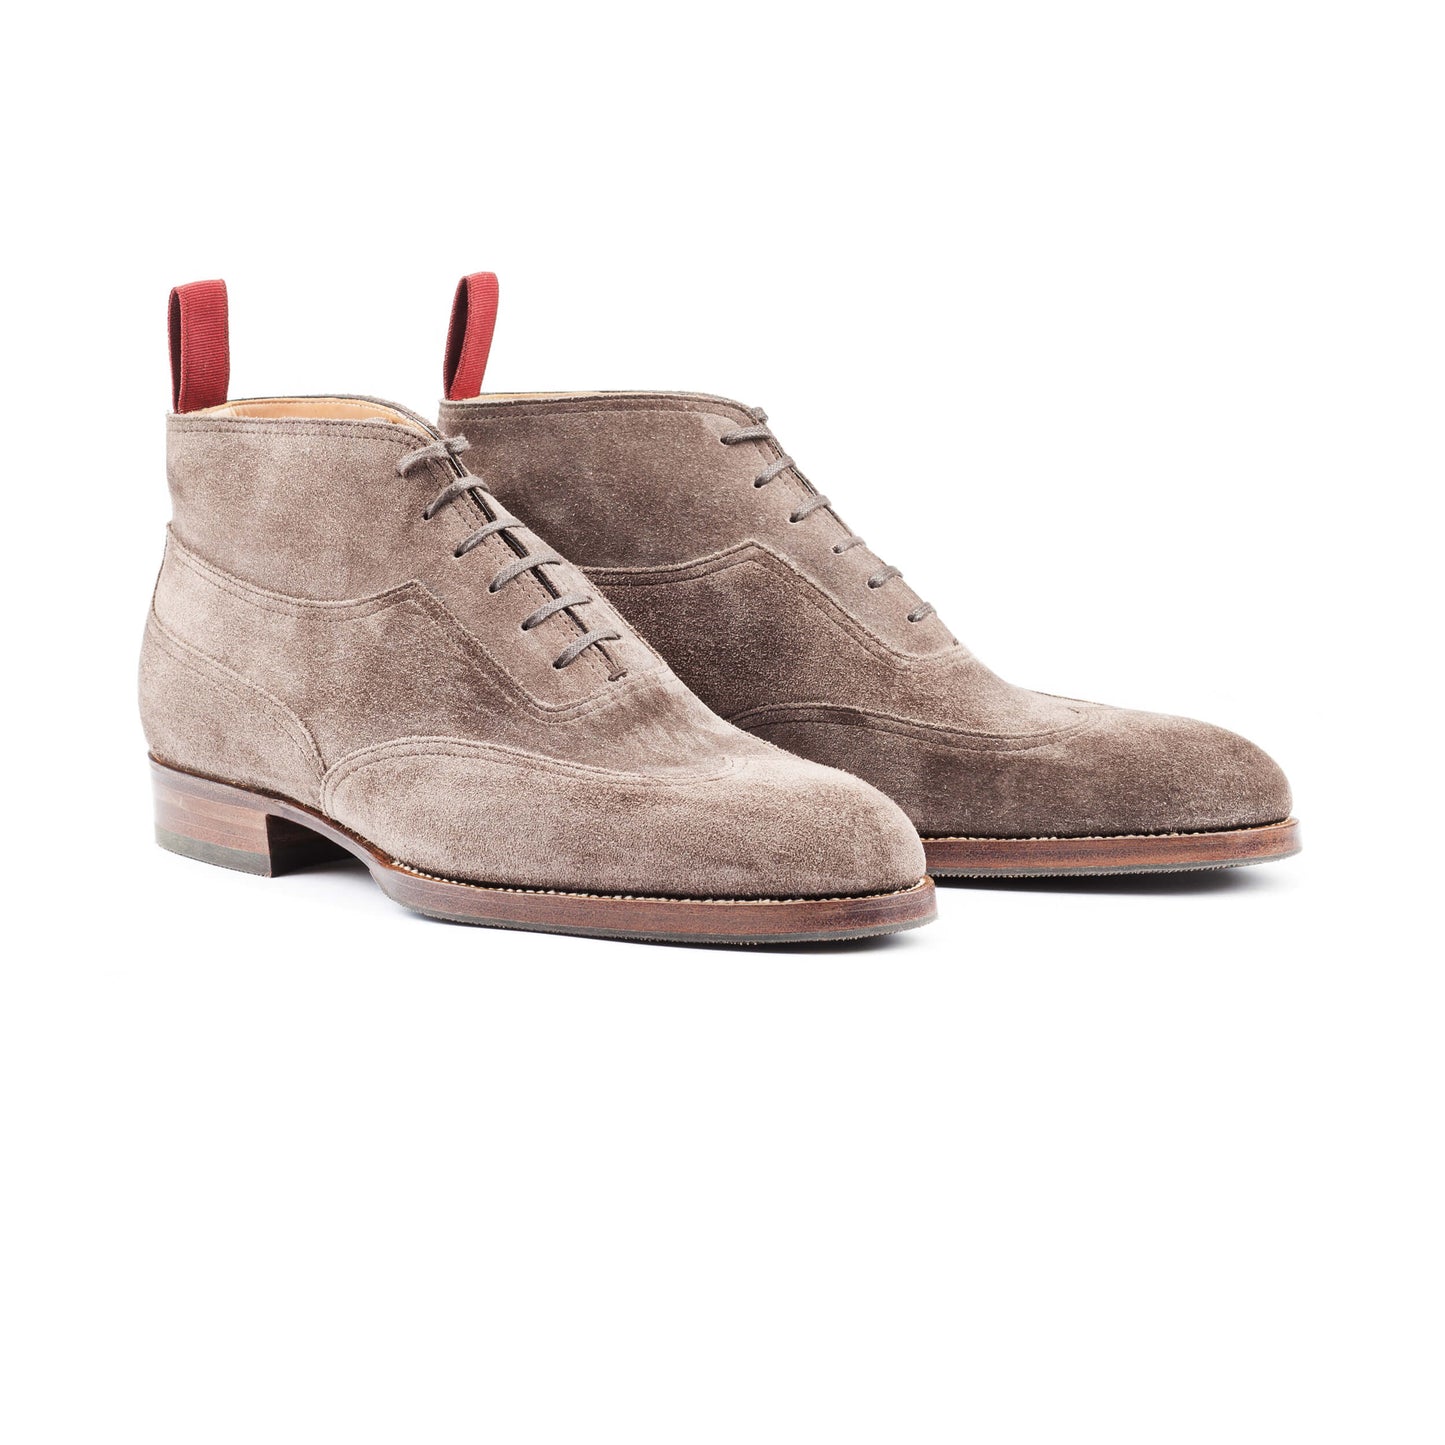 Oxford bootee, plain sewn wing tip